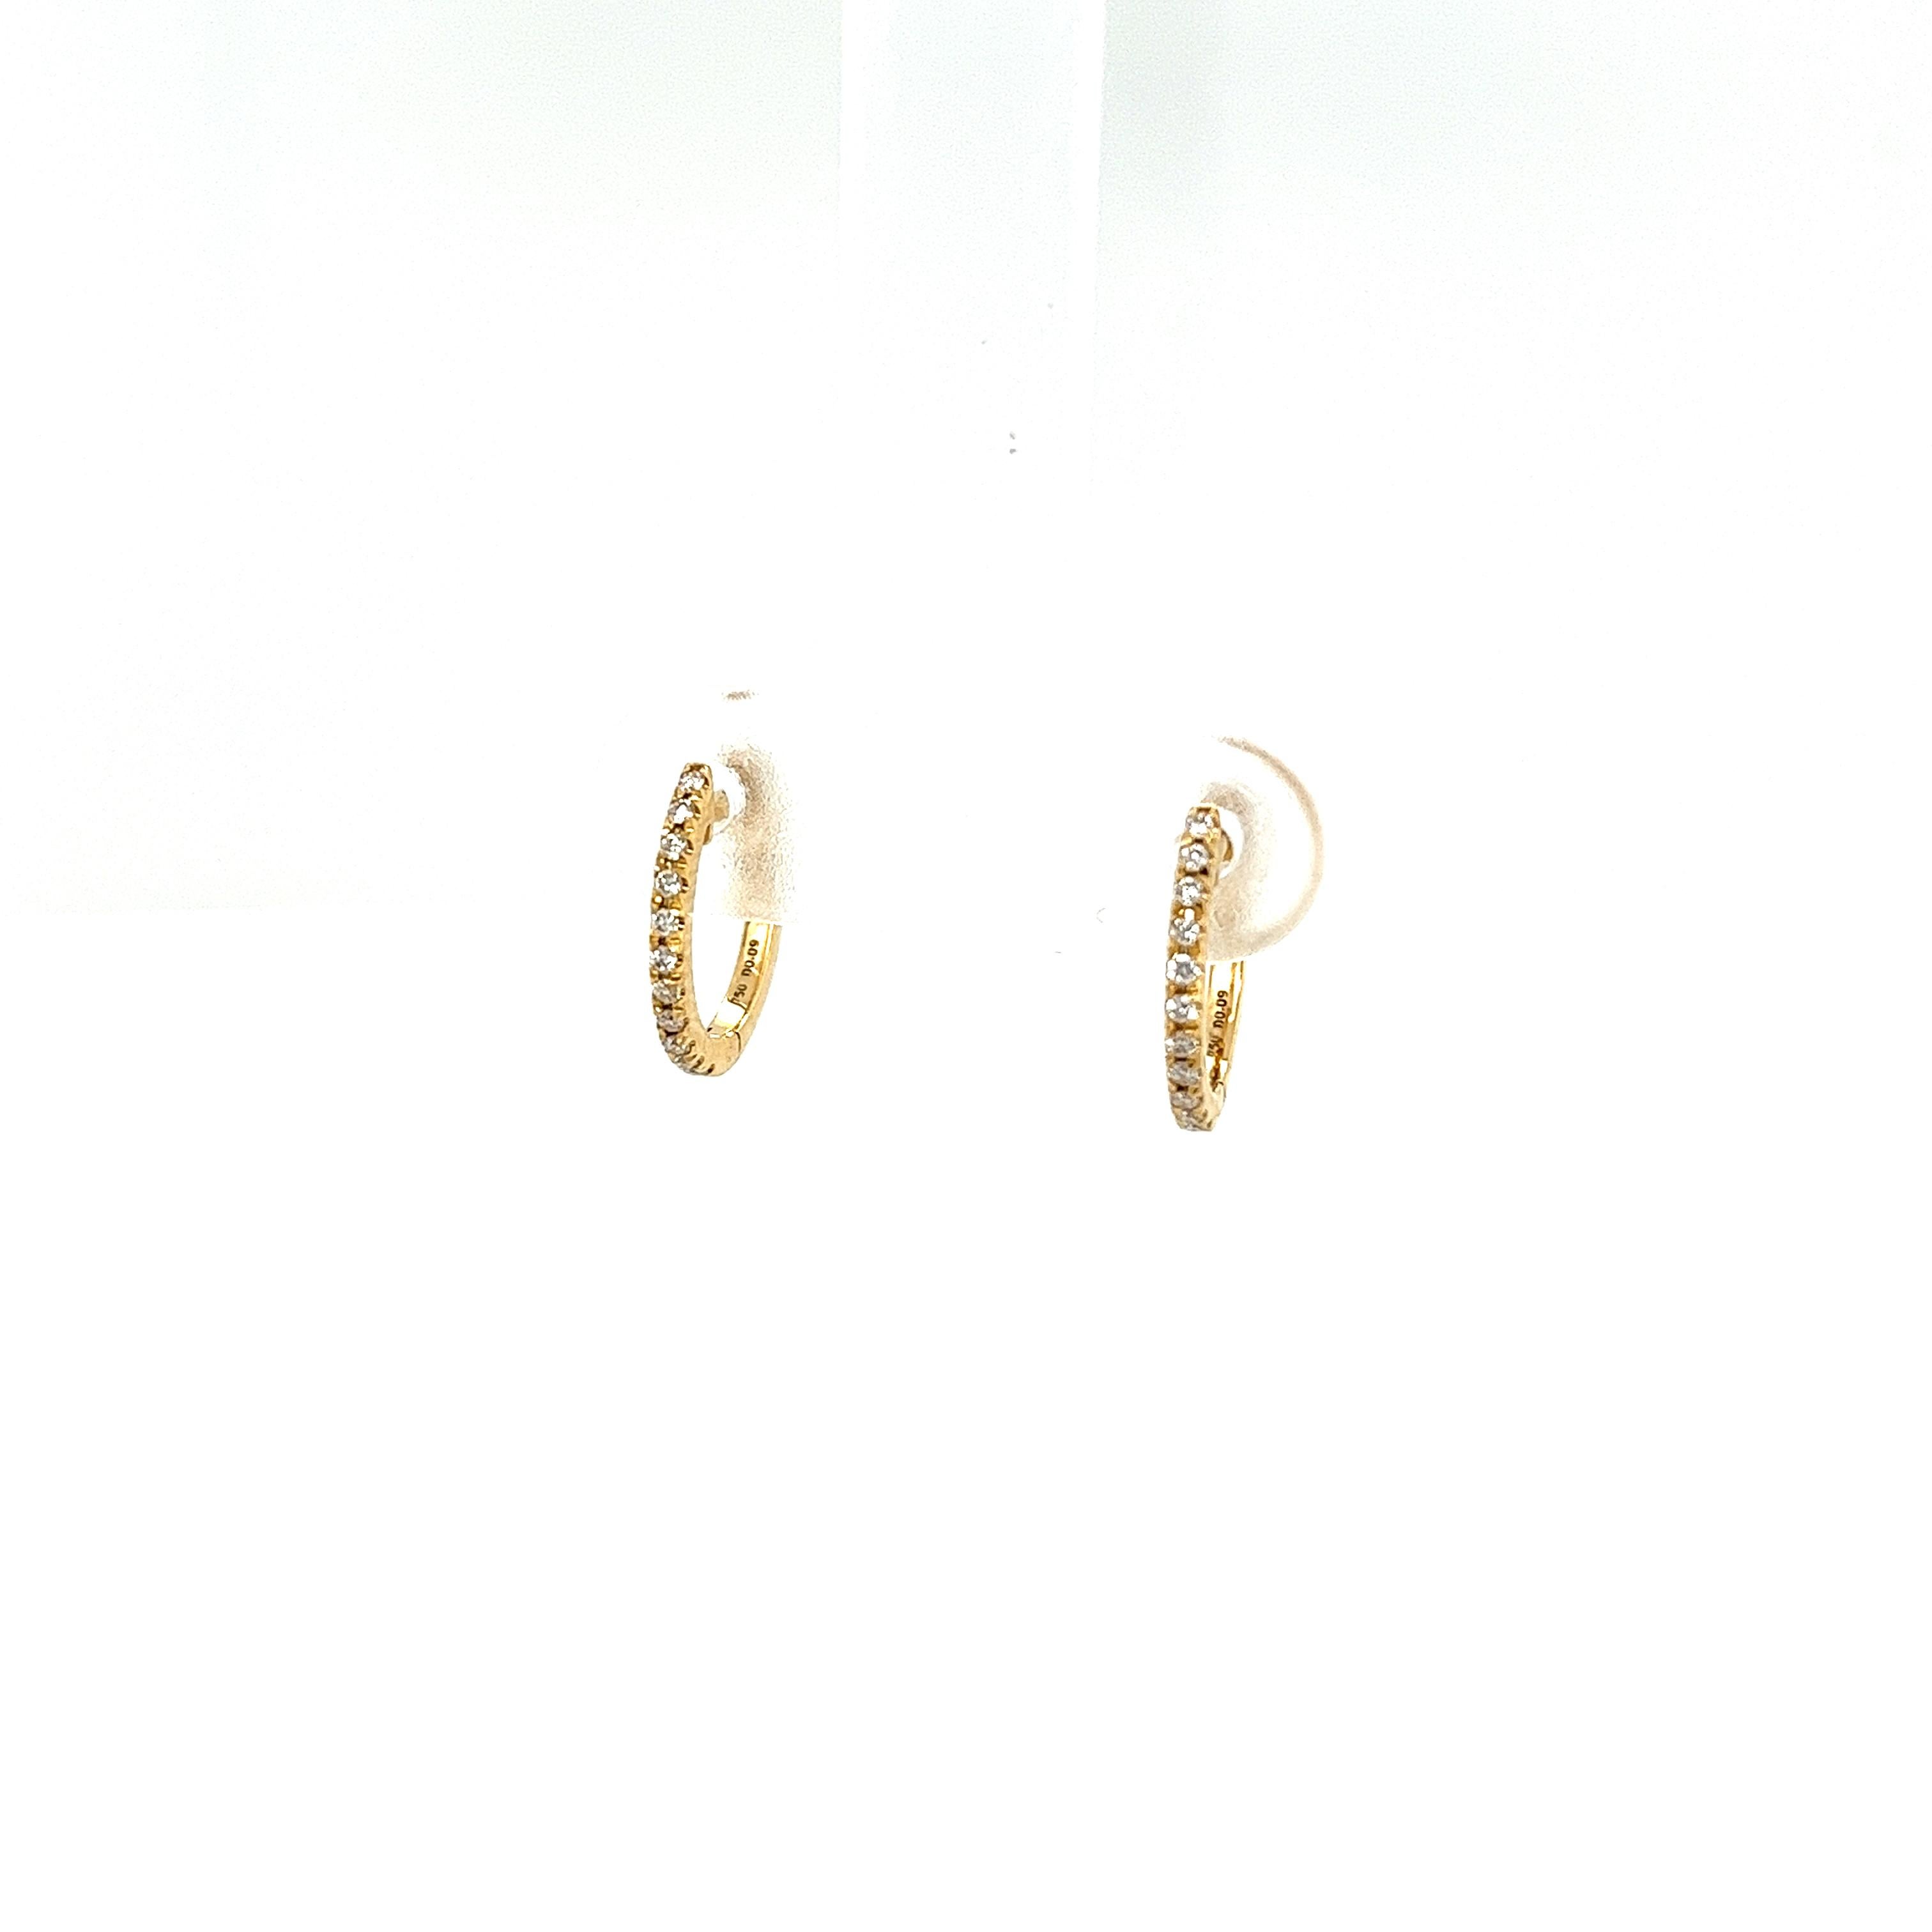 18ct Yellow Gold Diamond Hoop Earrings, Set With 0.09ct Of Round Diamonds, 11mm For Sale 1